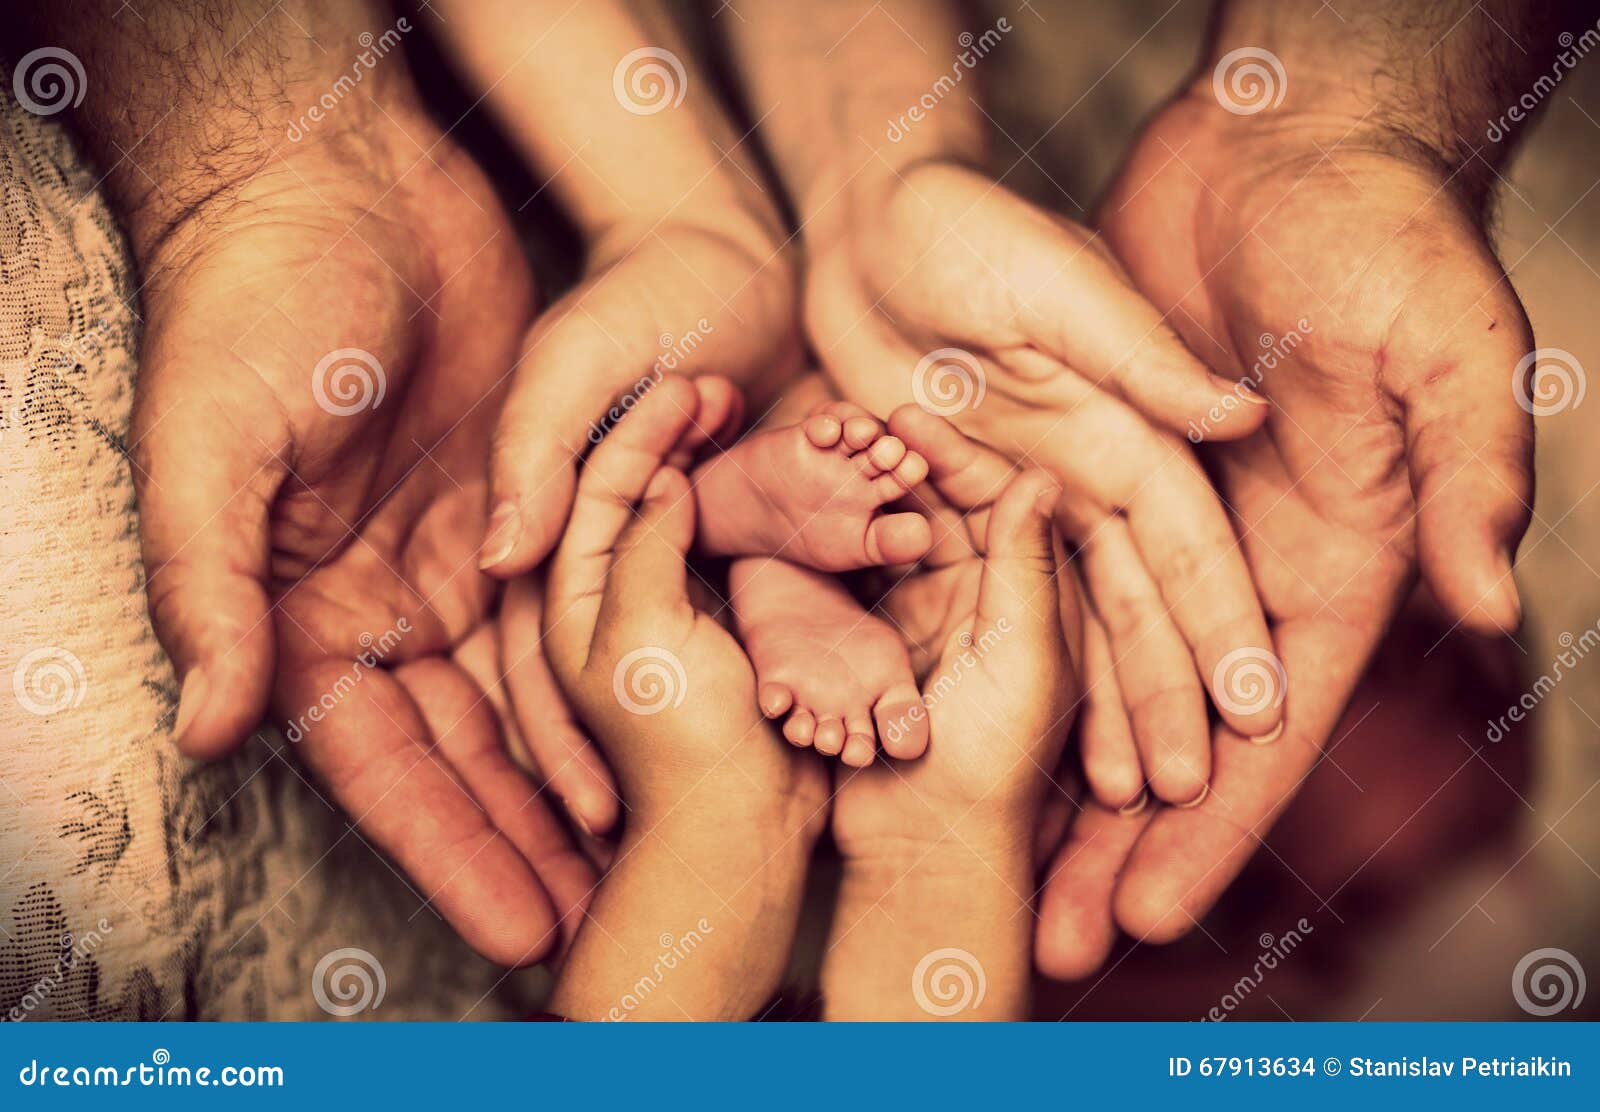 hands of father, mother, daughter keep little feet baby. friendly happy family